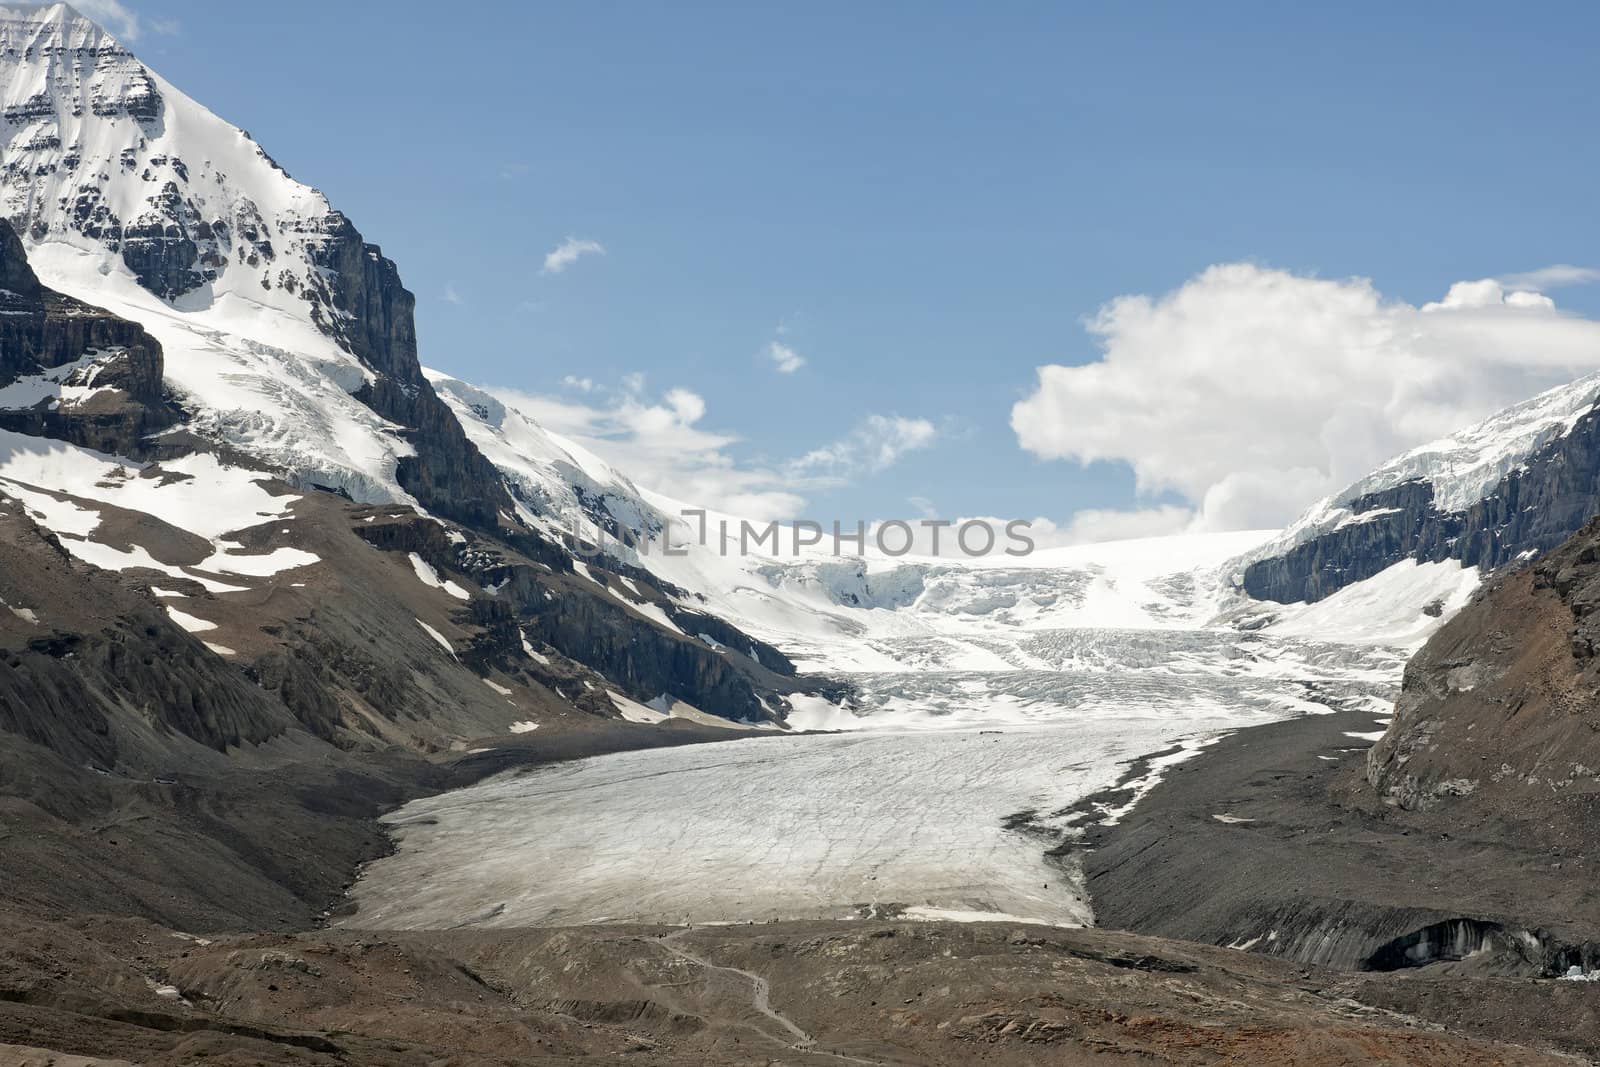 The white glacier capped by blue skies descends in brown dry valley.